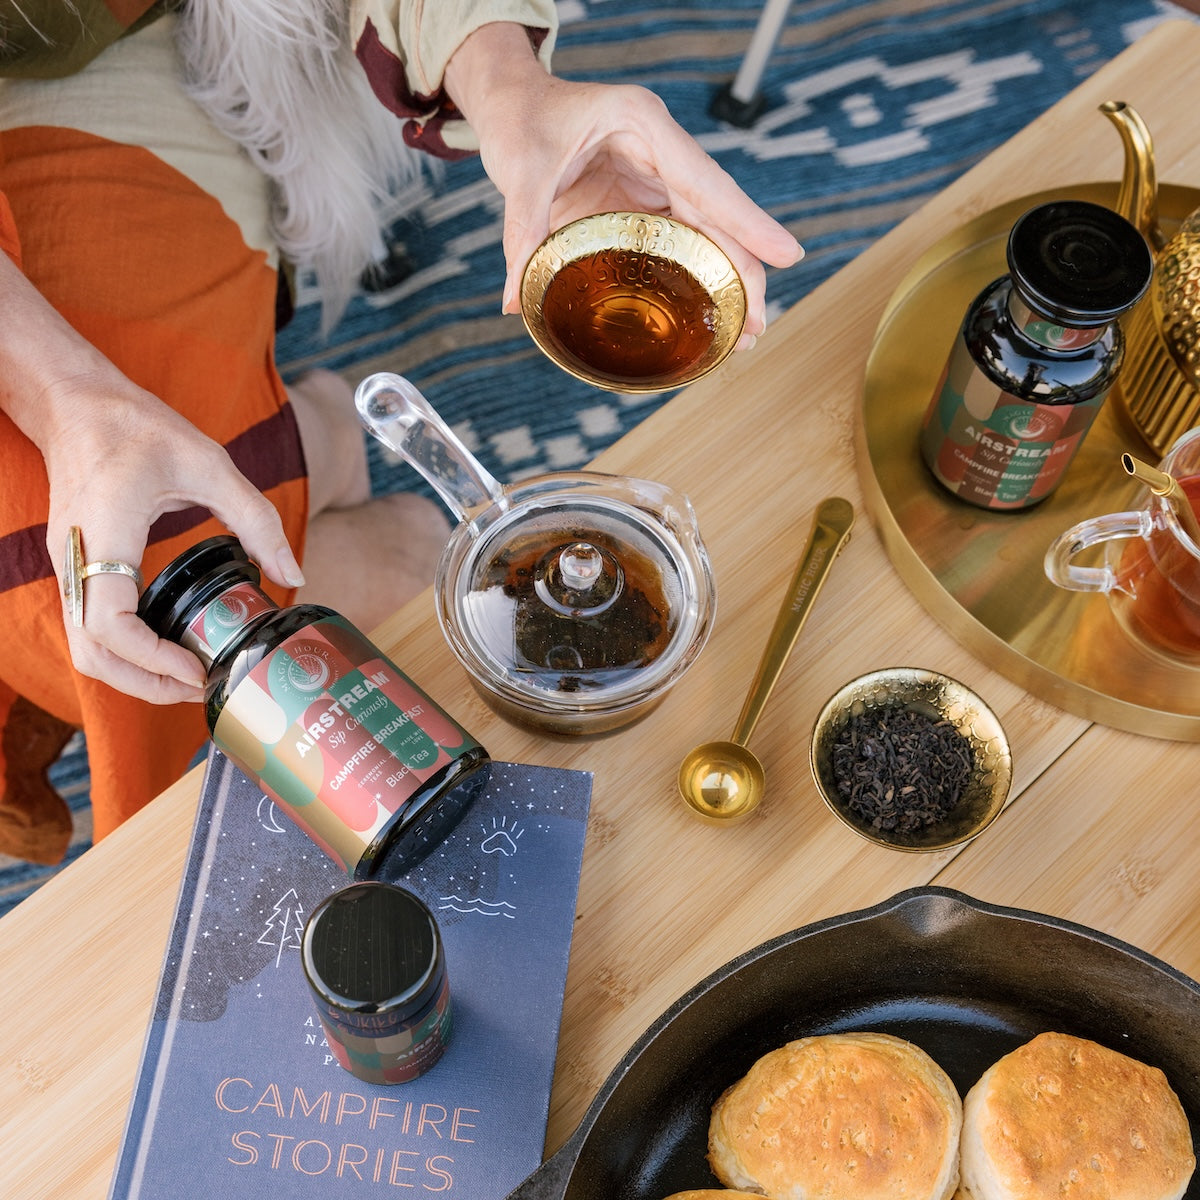 Campfire Breakfast Tea in various sizes on a wooden table with a campfire stories book, cast iron pan with biscuits, and a gold cup with loose leaf tea. 